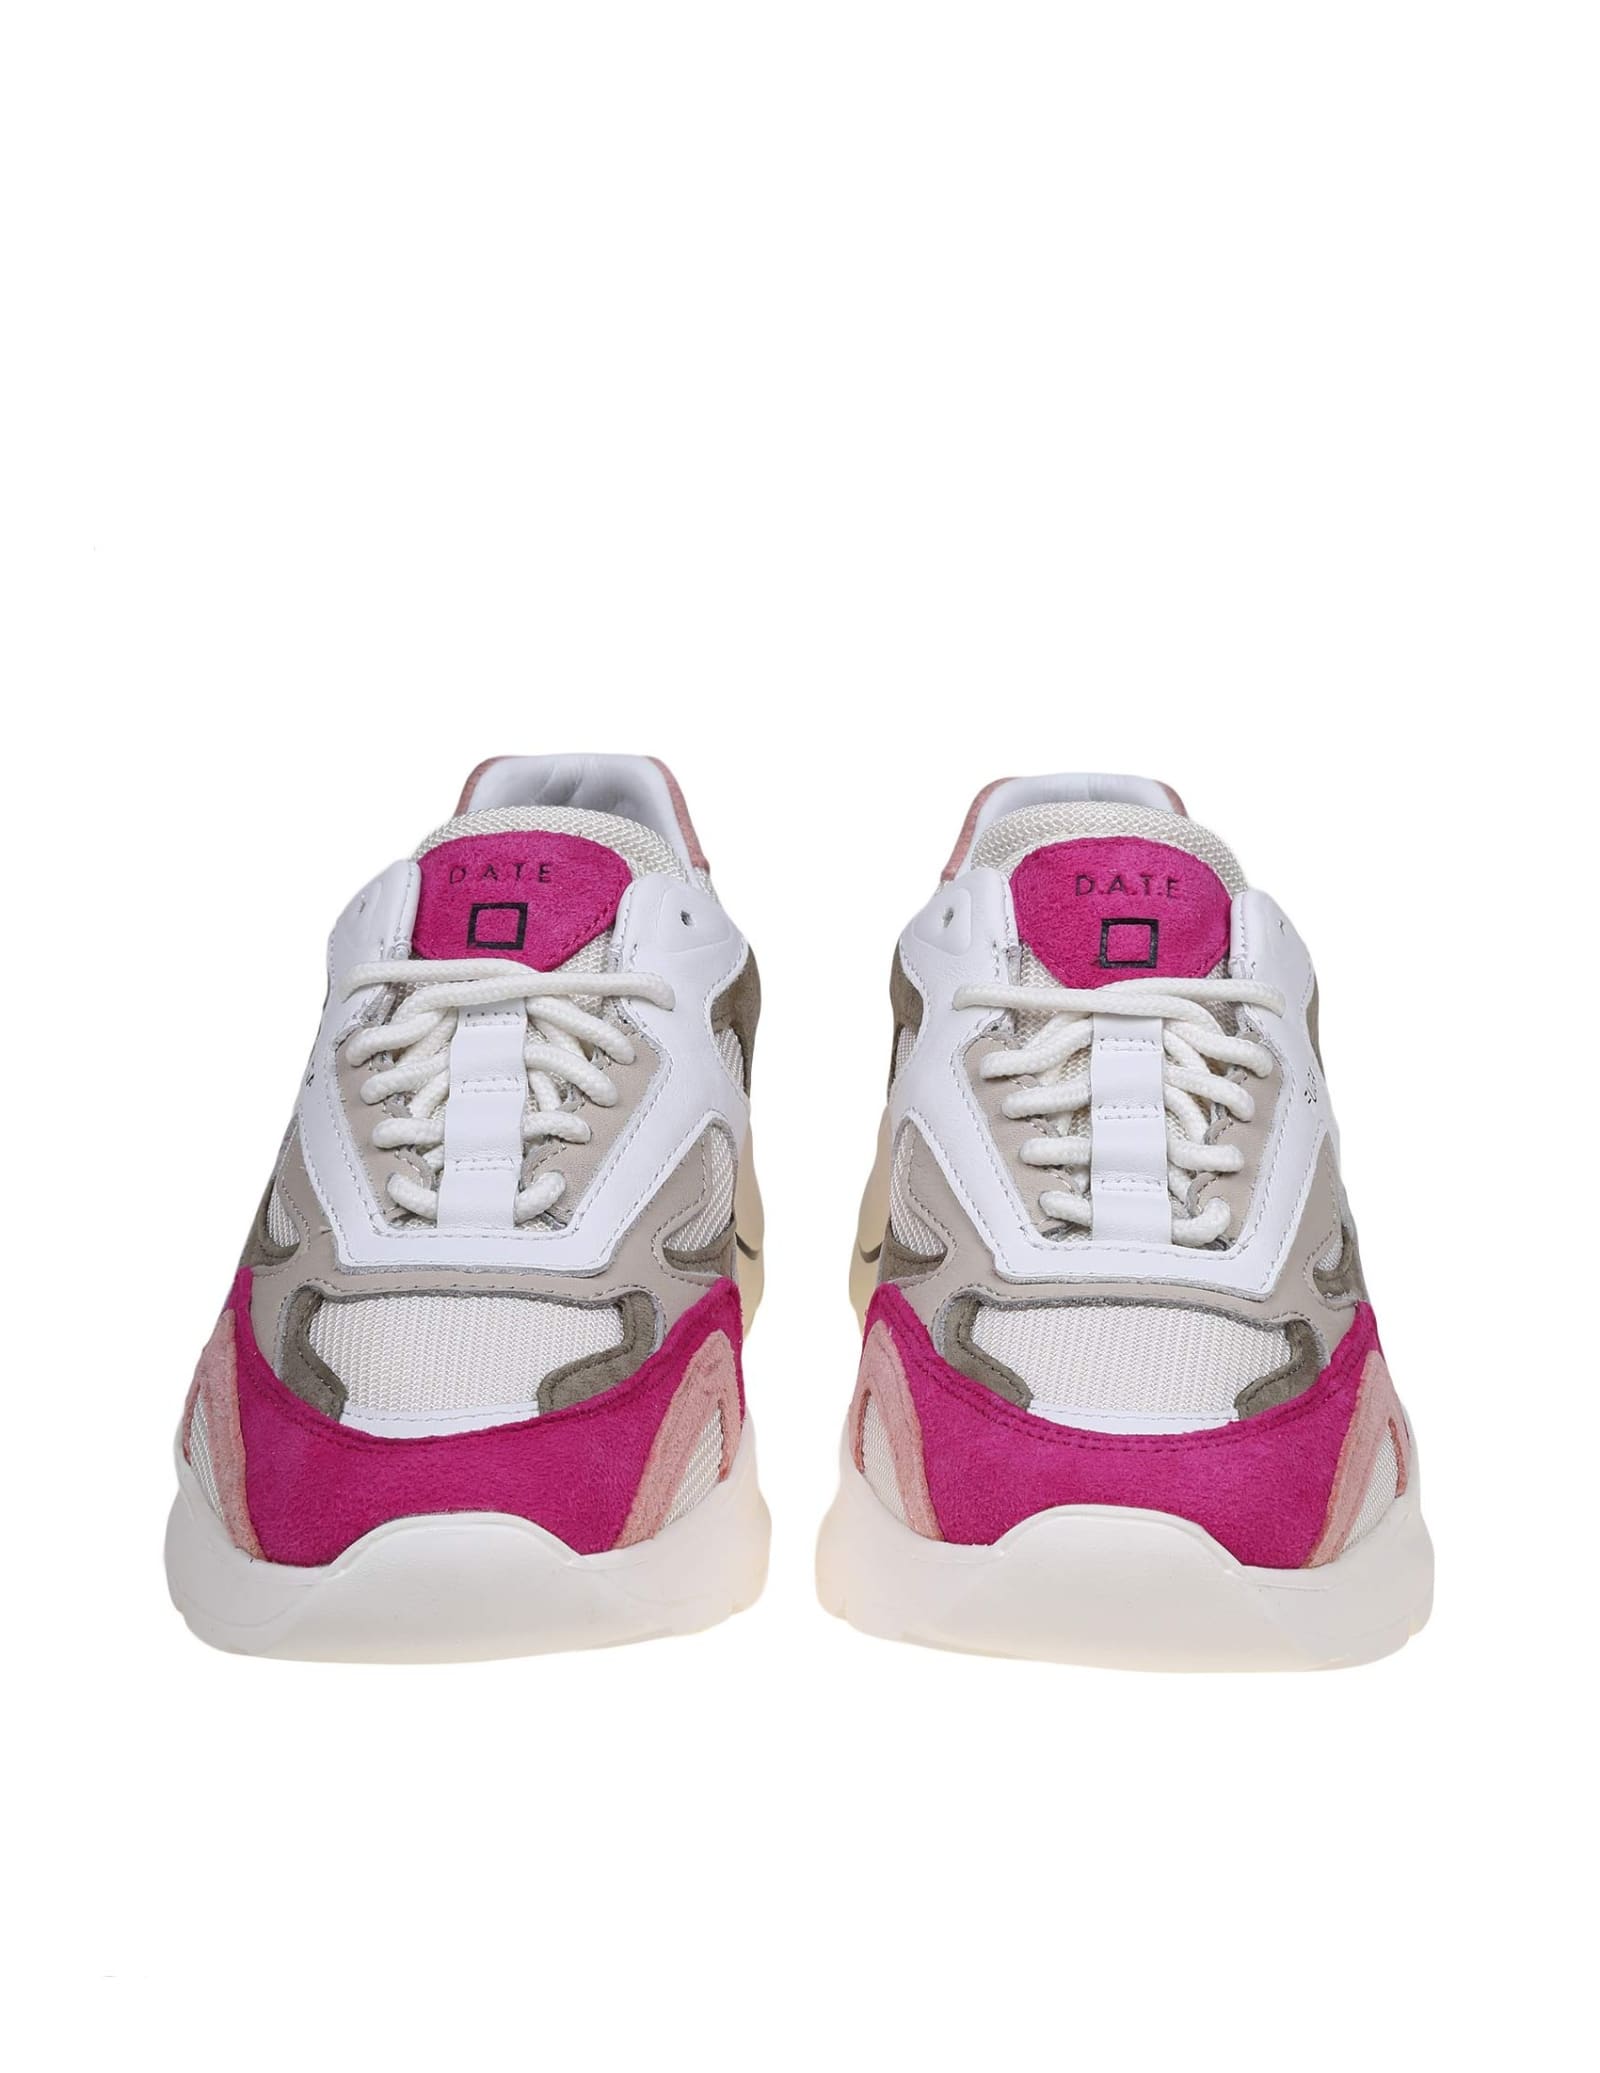 Shop Date Fuga Sneakers In White/fuchsia Leather And Suede In White/fuxia